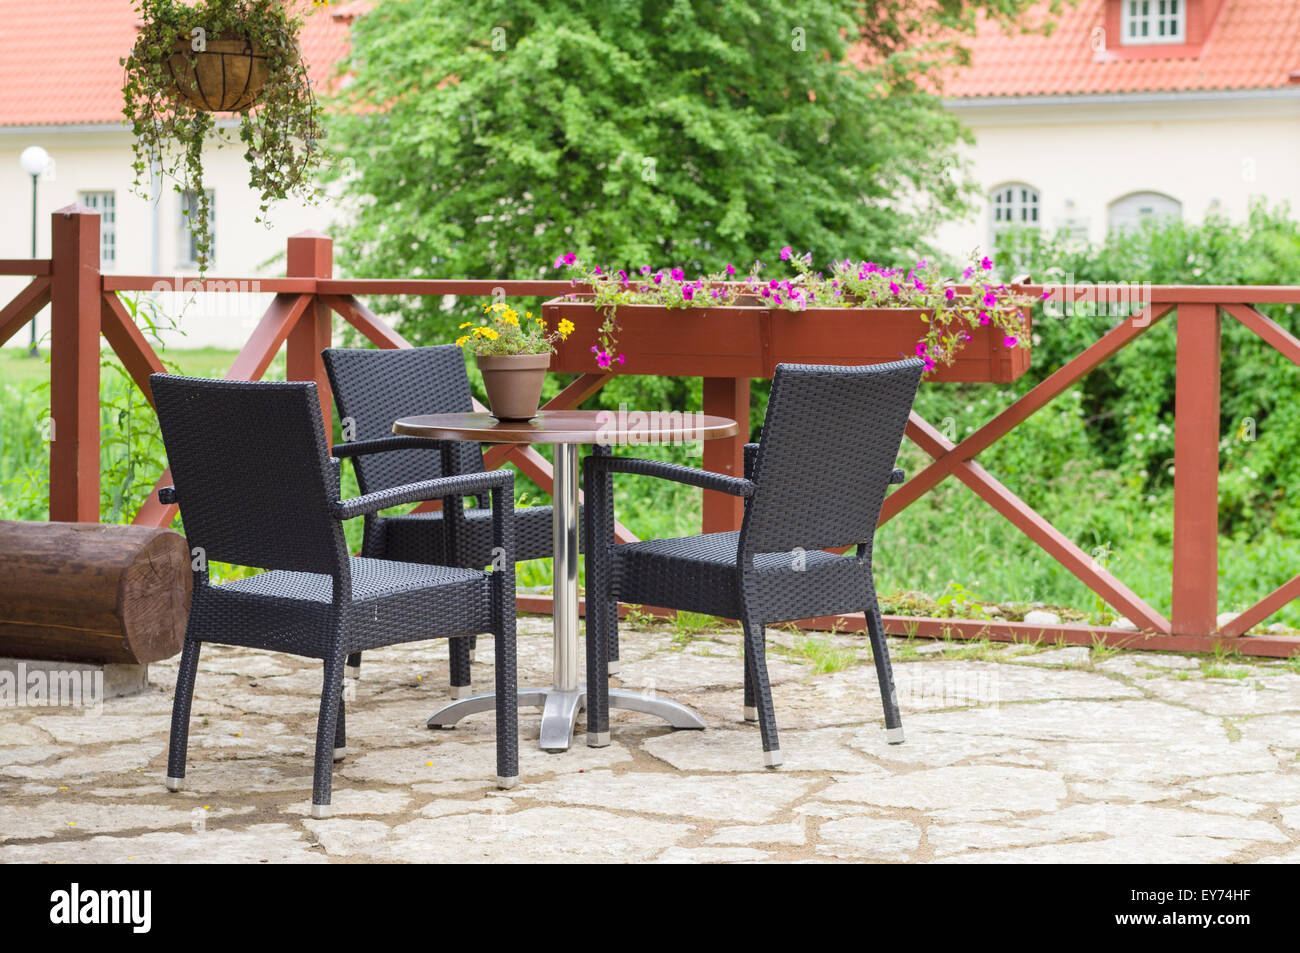 Table and chairs of traditional european outdoor cafe Stock Photo